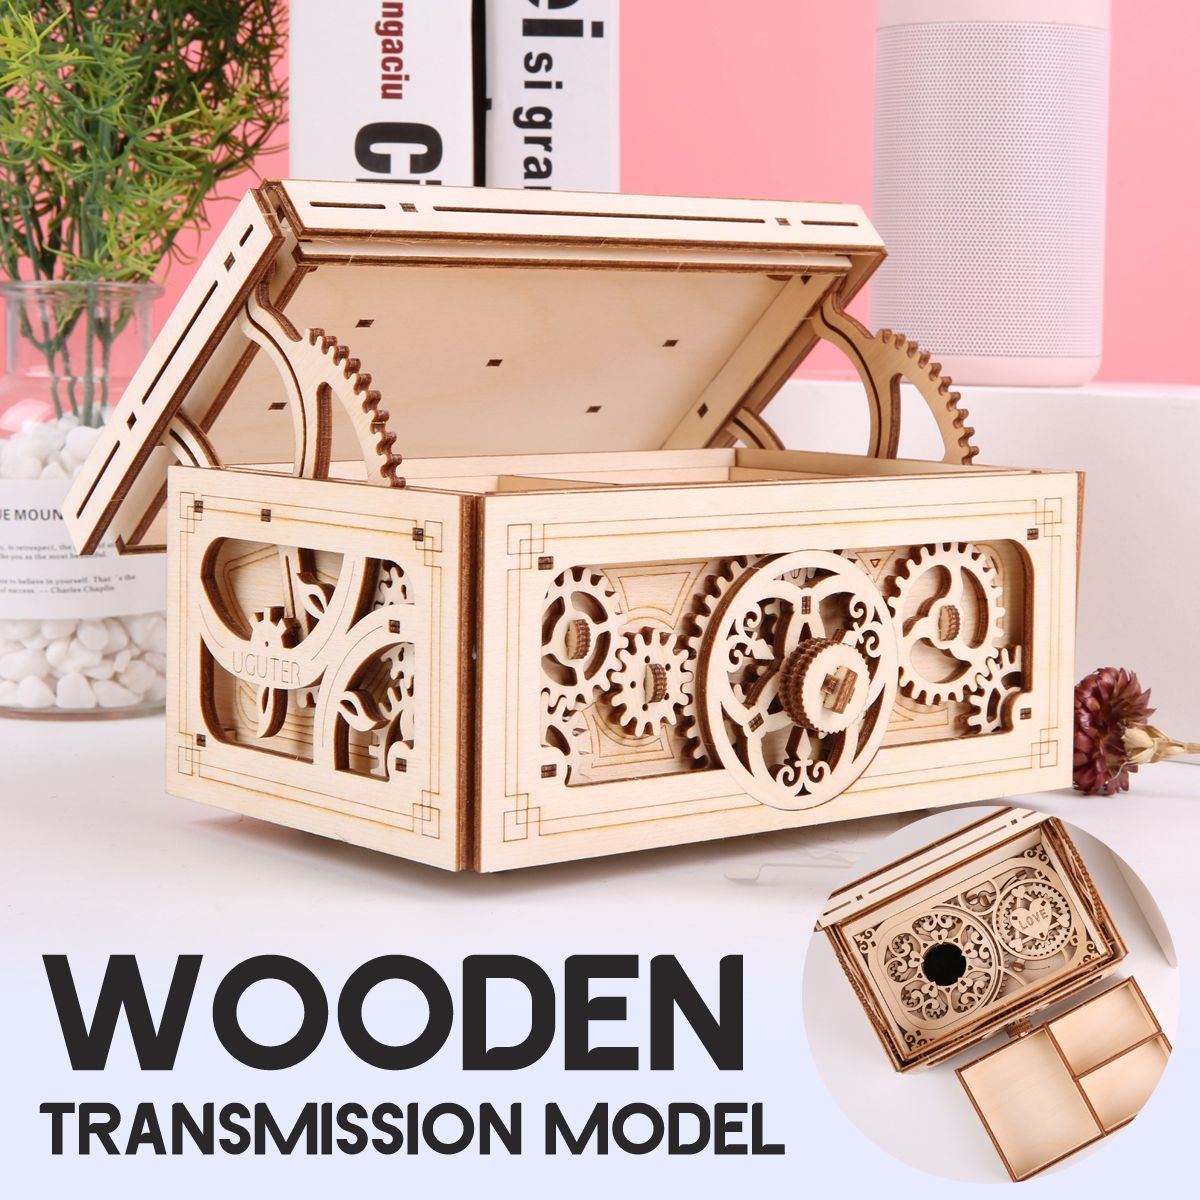 DIY-Spike-Double-Jewerlry-Box-Wooden-Transmission-Model-Assembly-Toys-Puzzle-1651602